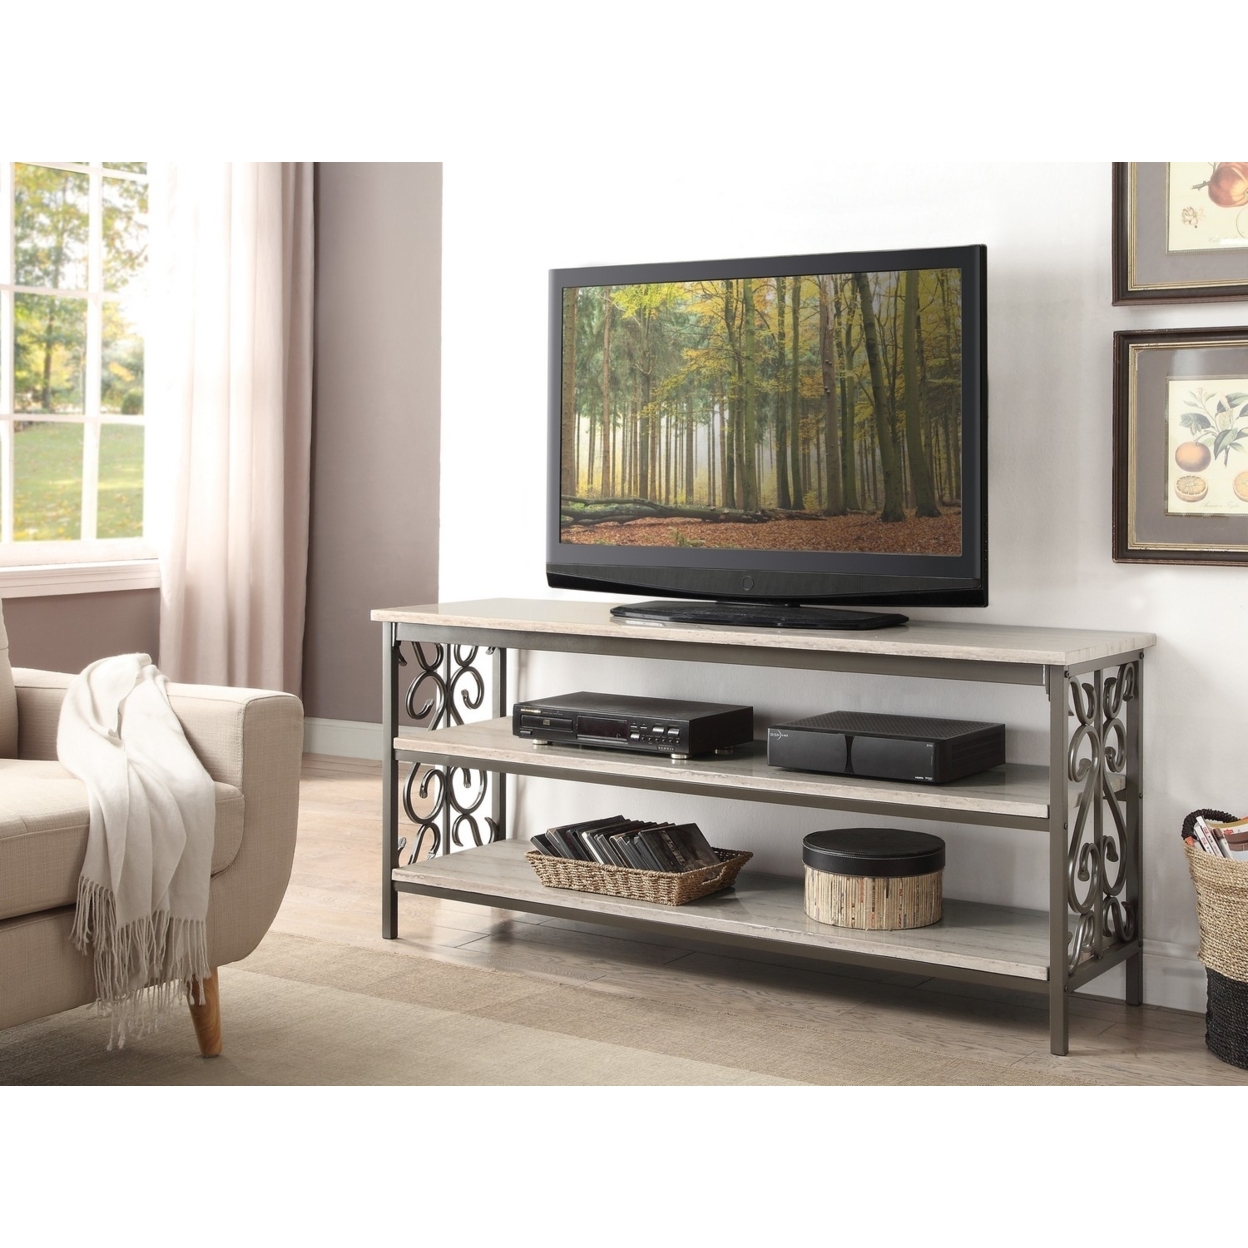 2 Tier TV Stand Or Sofa Table With Marble Shelves, Cream & Gray- Saltoro Sherpi